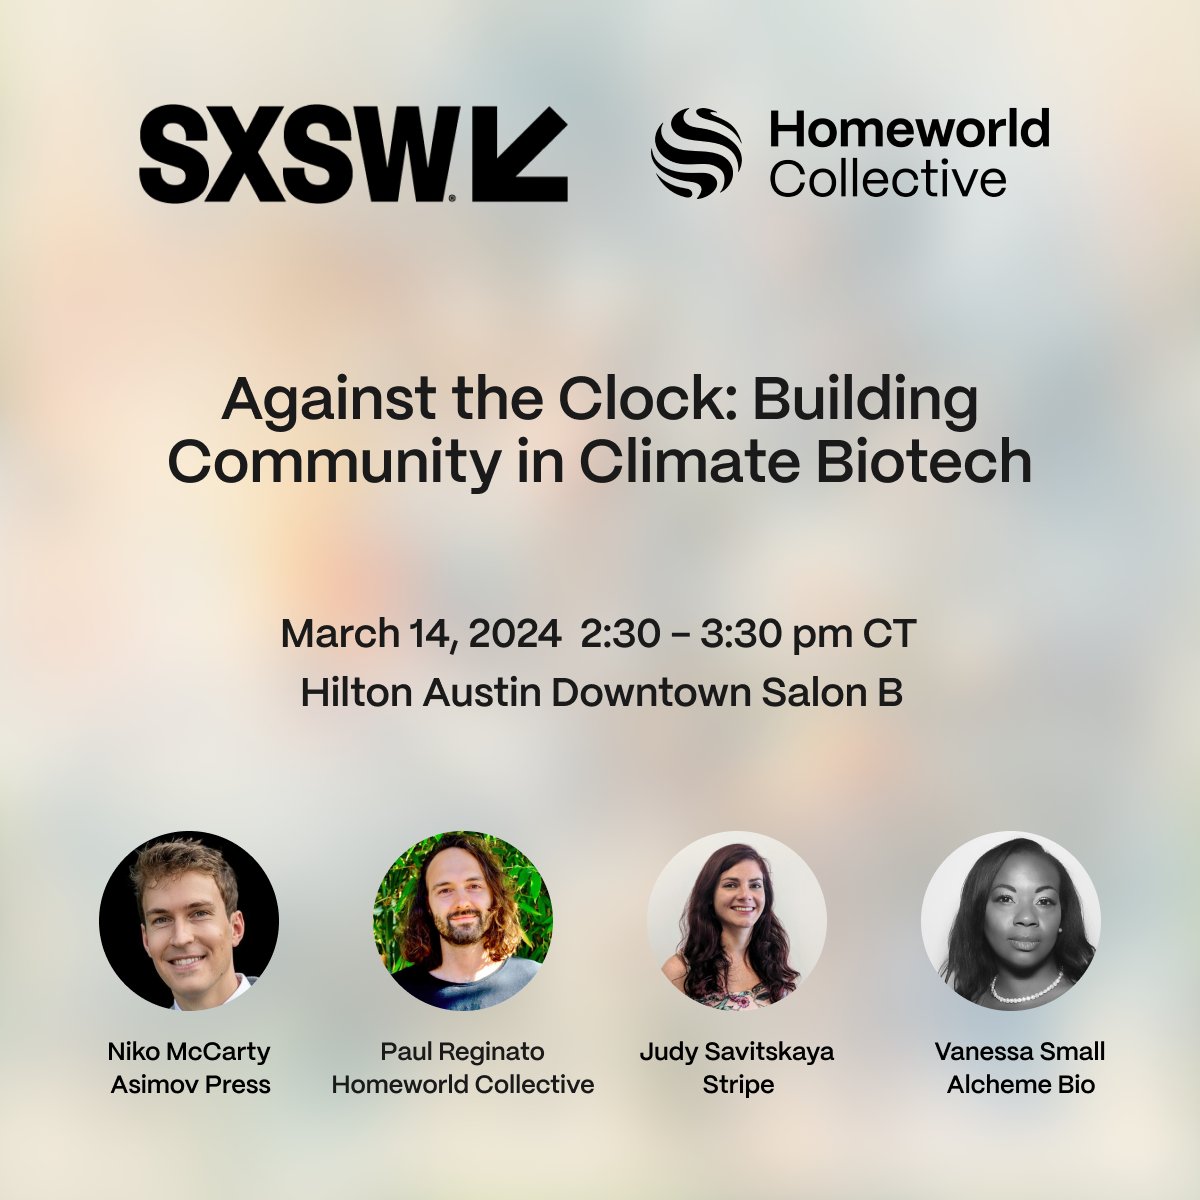 We're excited to be attending @sxsw for the first time this year! @PaulReginato will be on a panel to speak about building community in climate biotech alongside @NikoMcCarty, @heyjudka and Vanessa Small. Are you attending SXSW this year? Let us know ⬇️ @stripe @AsimovBio